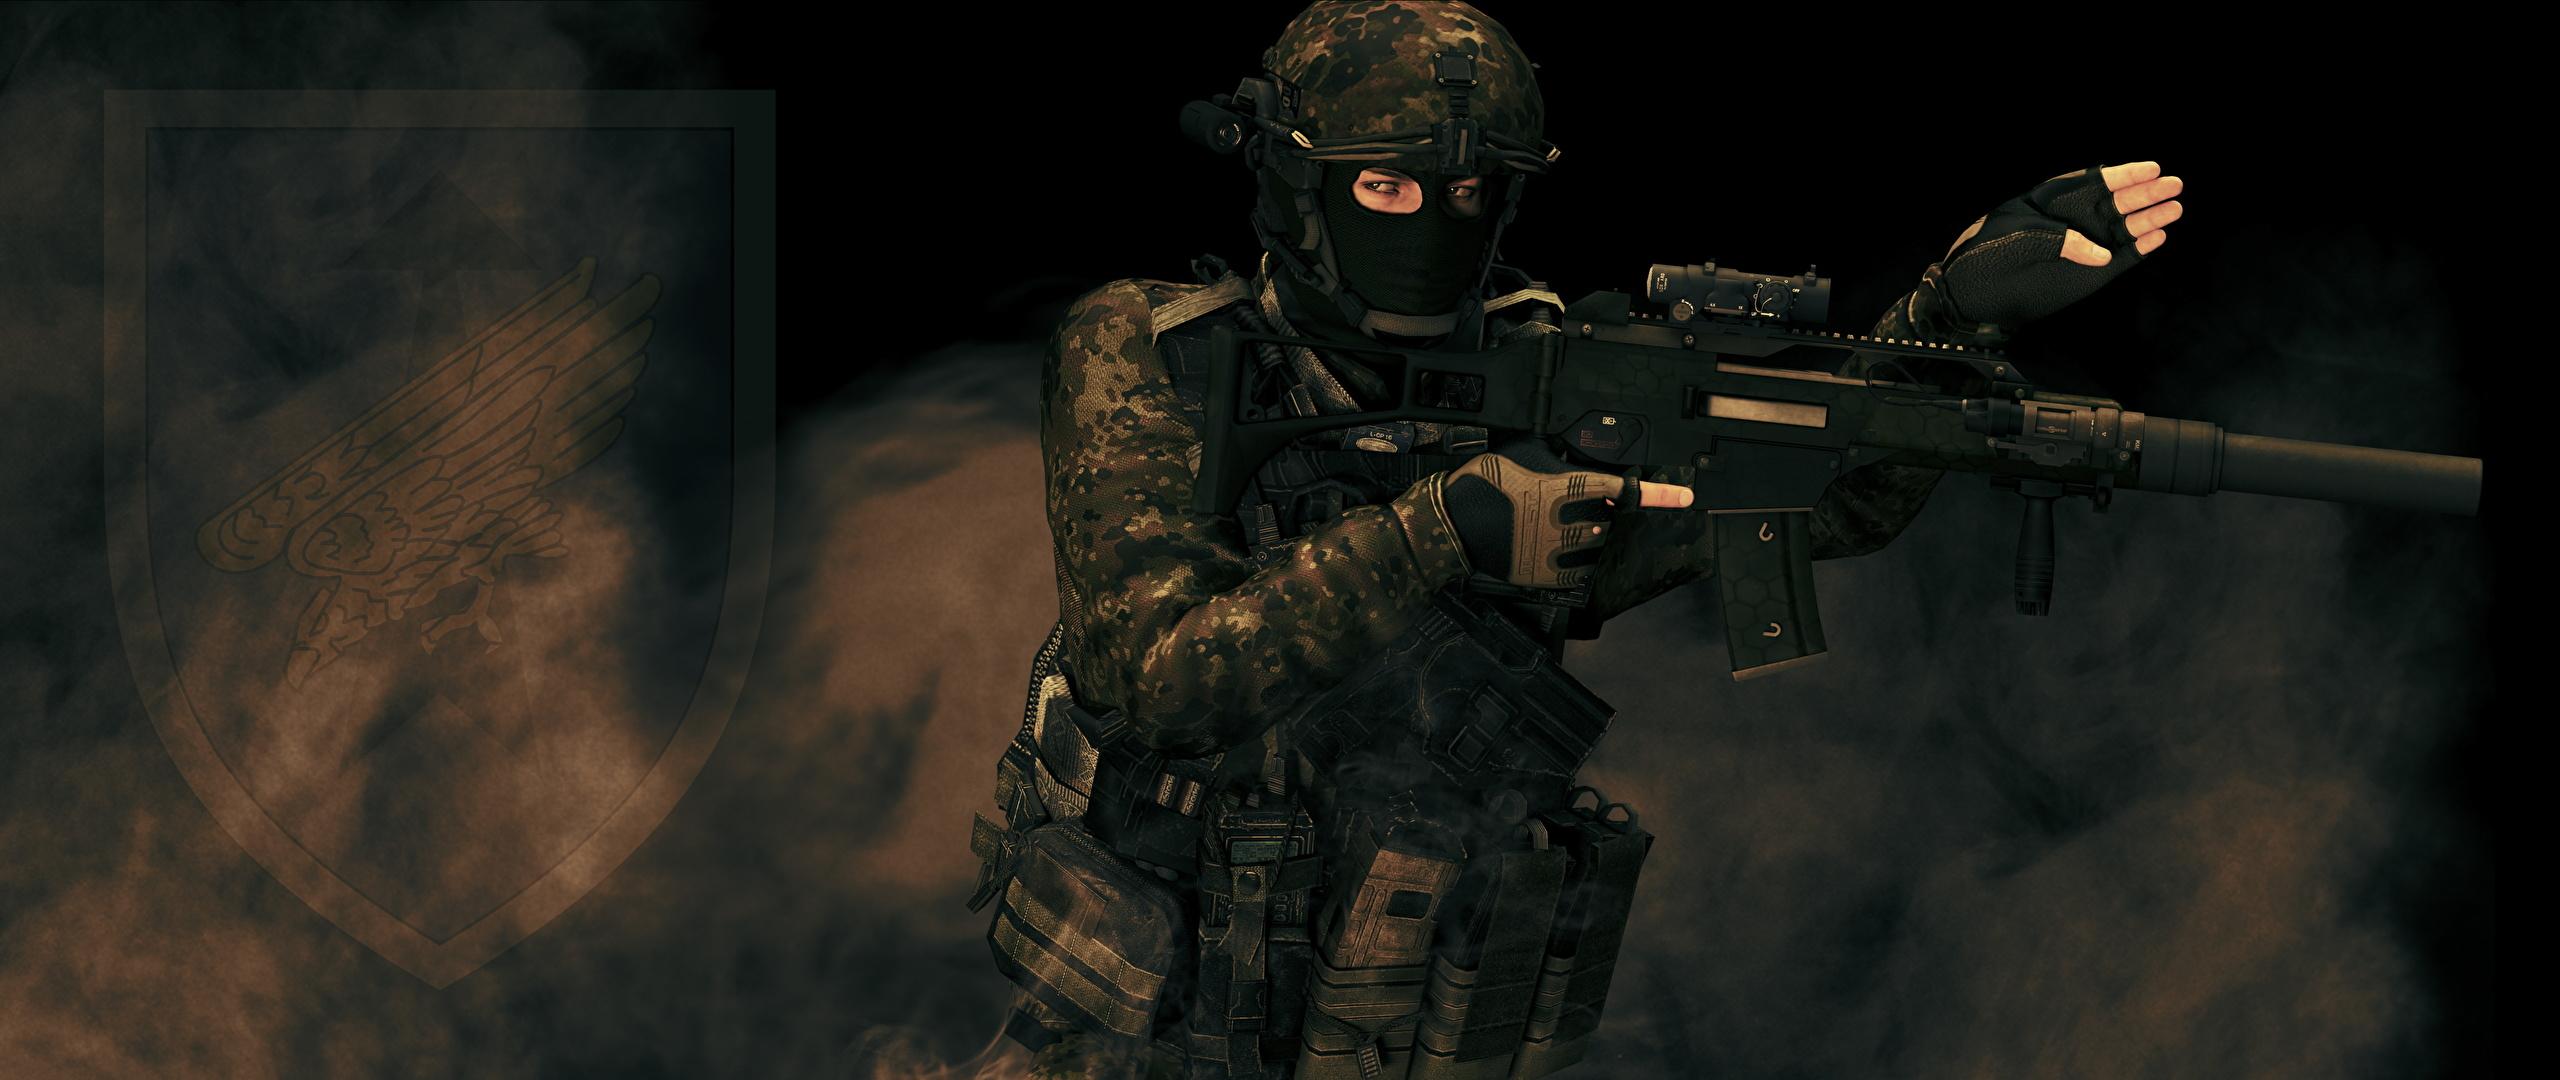 Wallpaper Soldiers Assault rifle Special Forces Command, 2560x1080